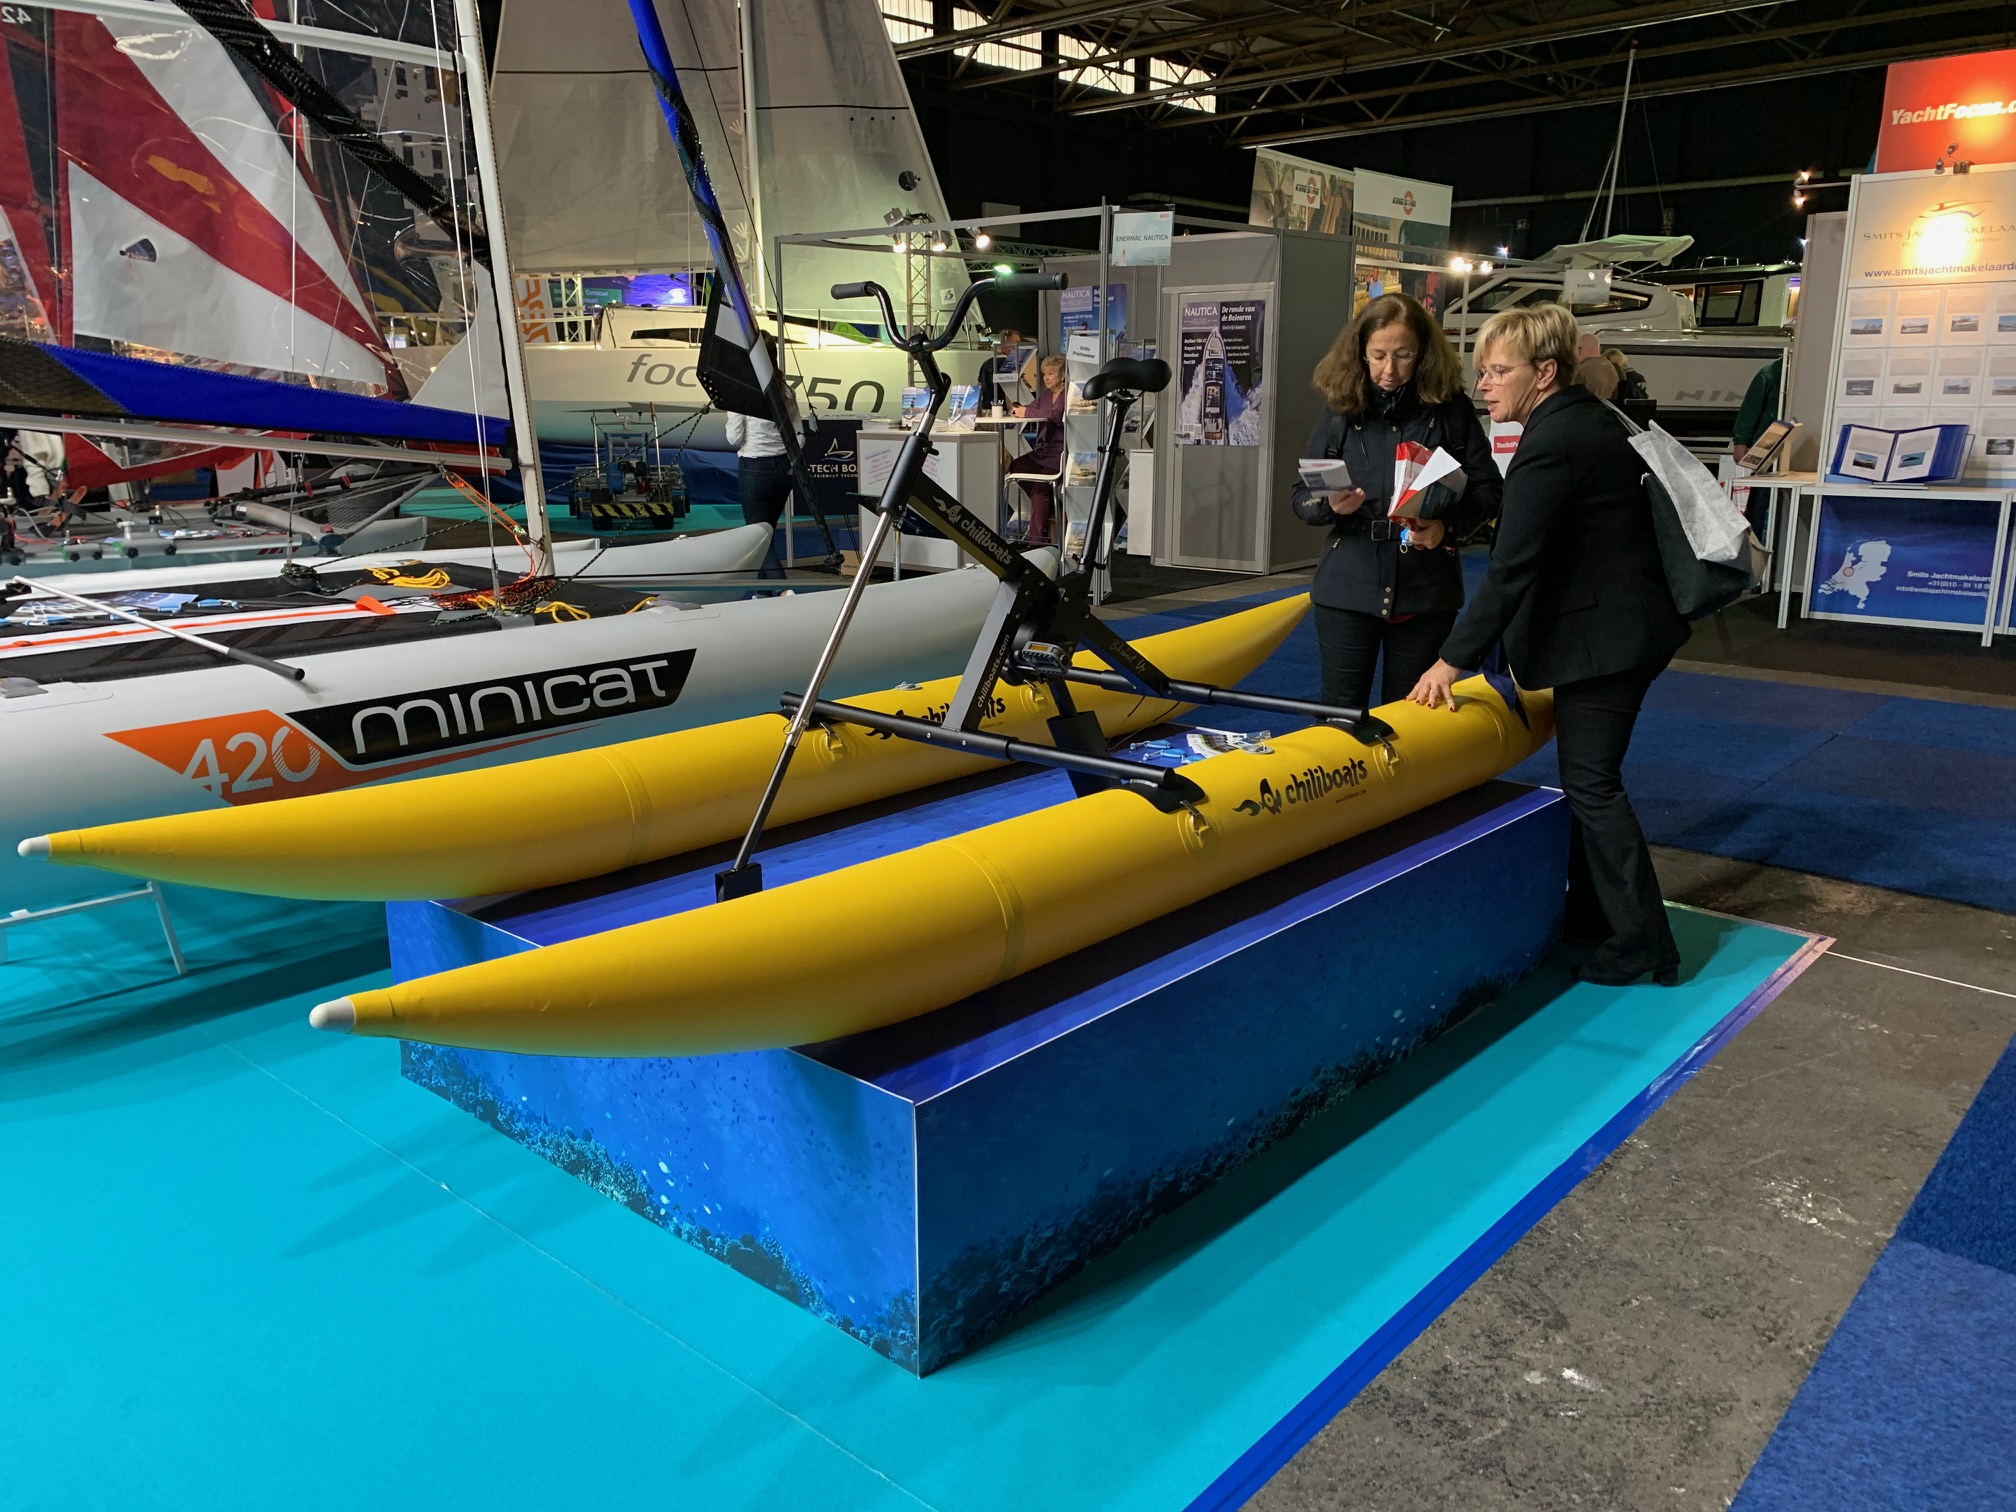 Chiliboats Waterbikes at Belgian Boat Show